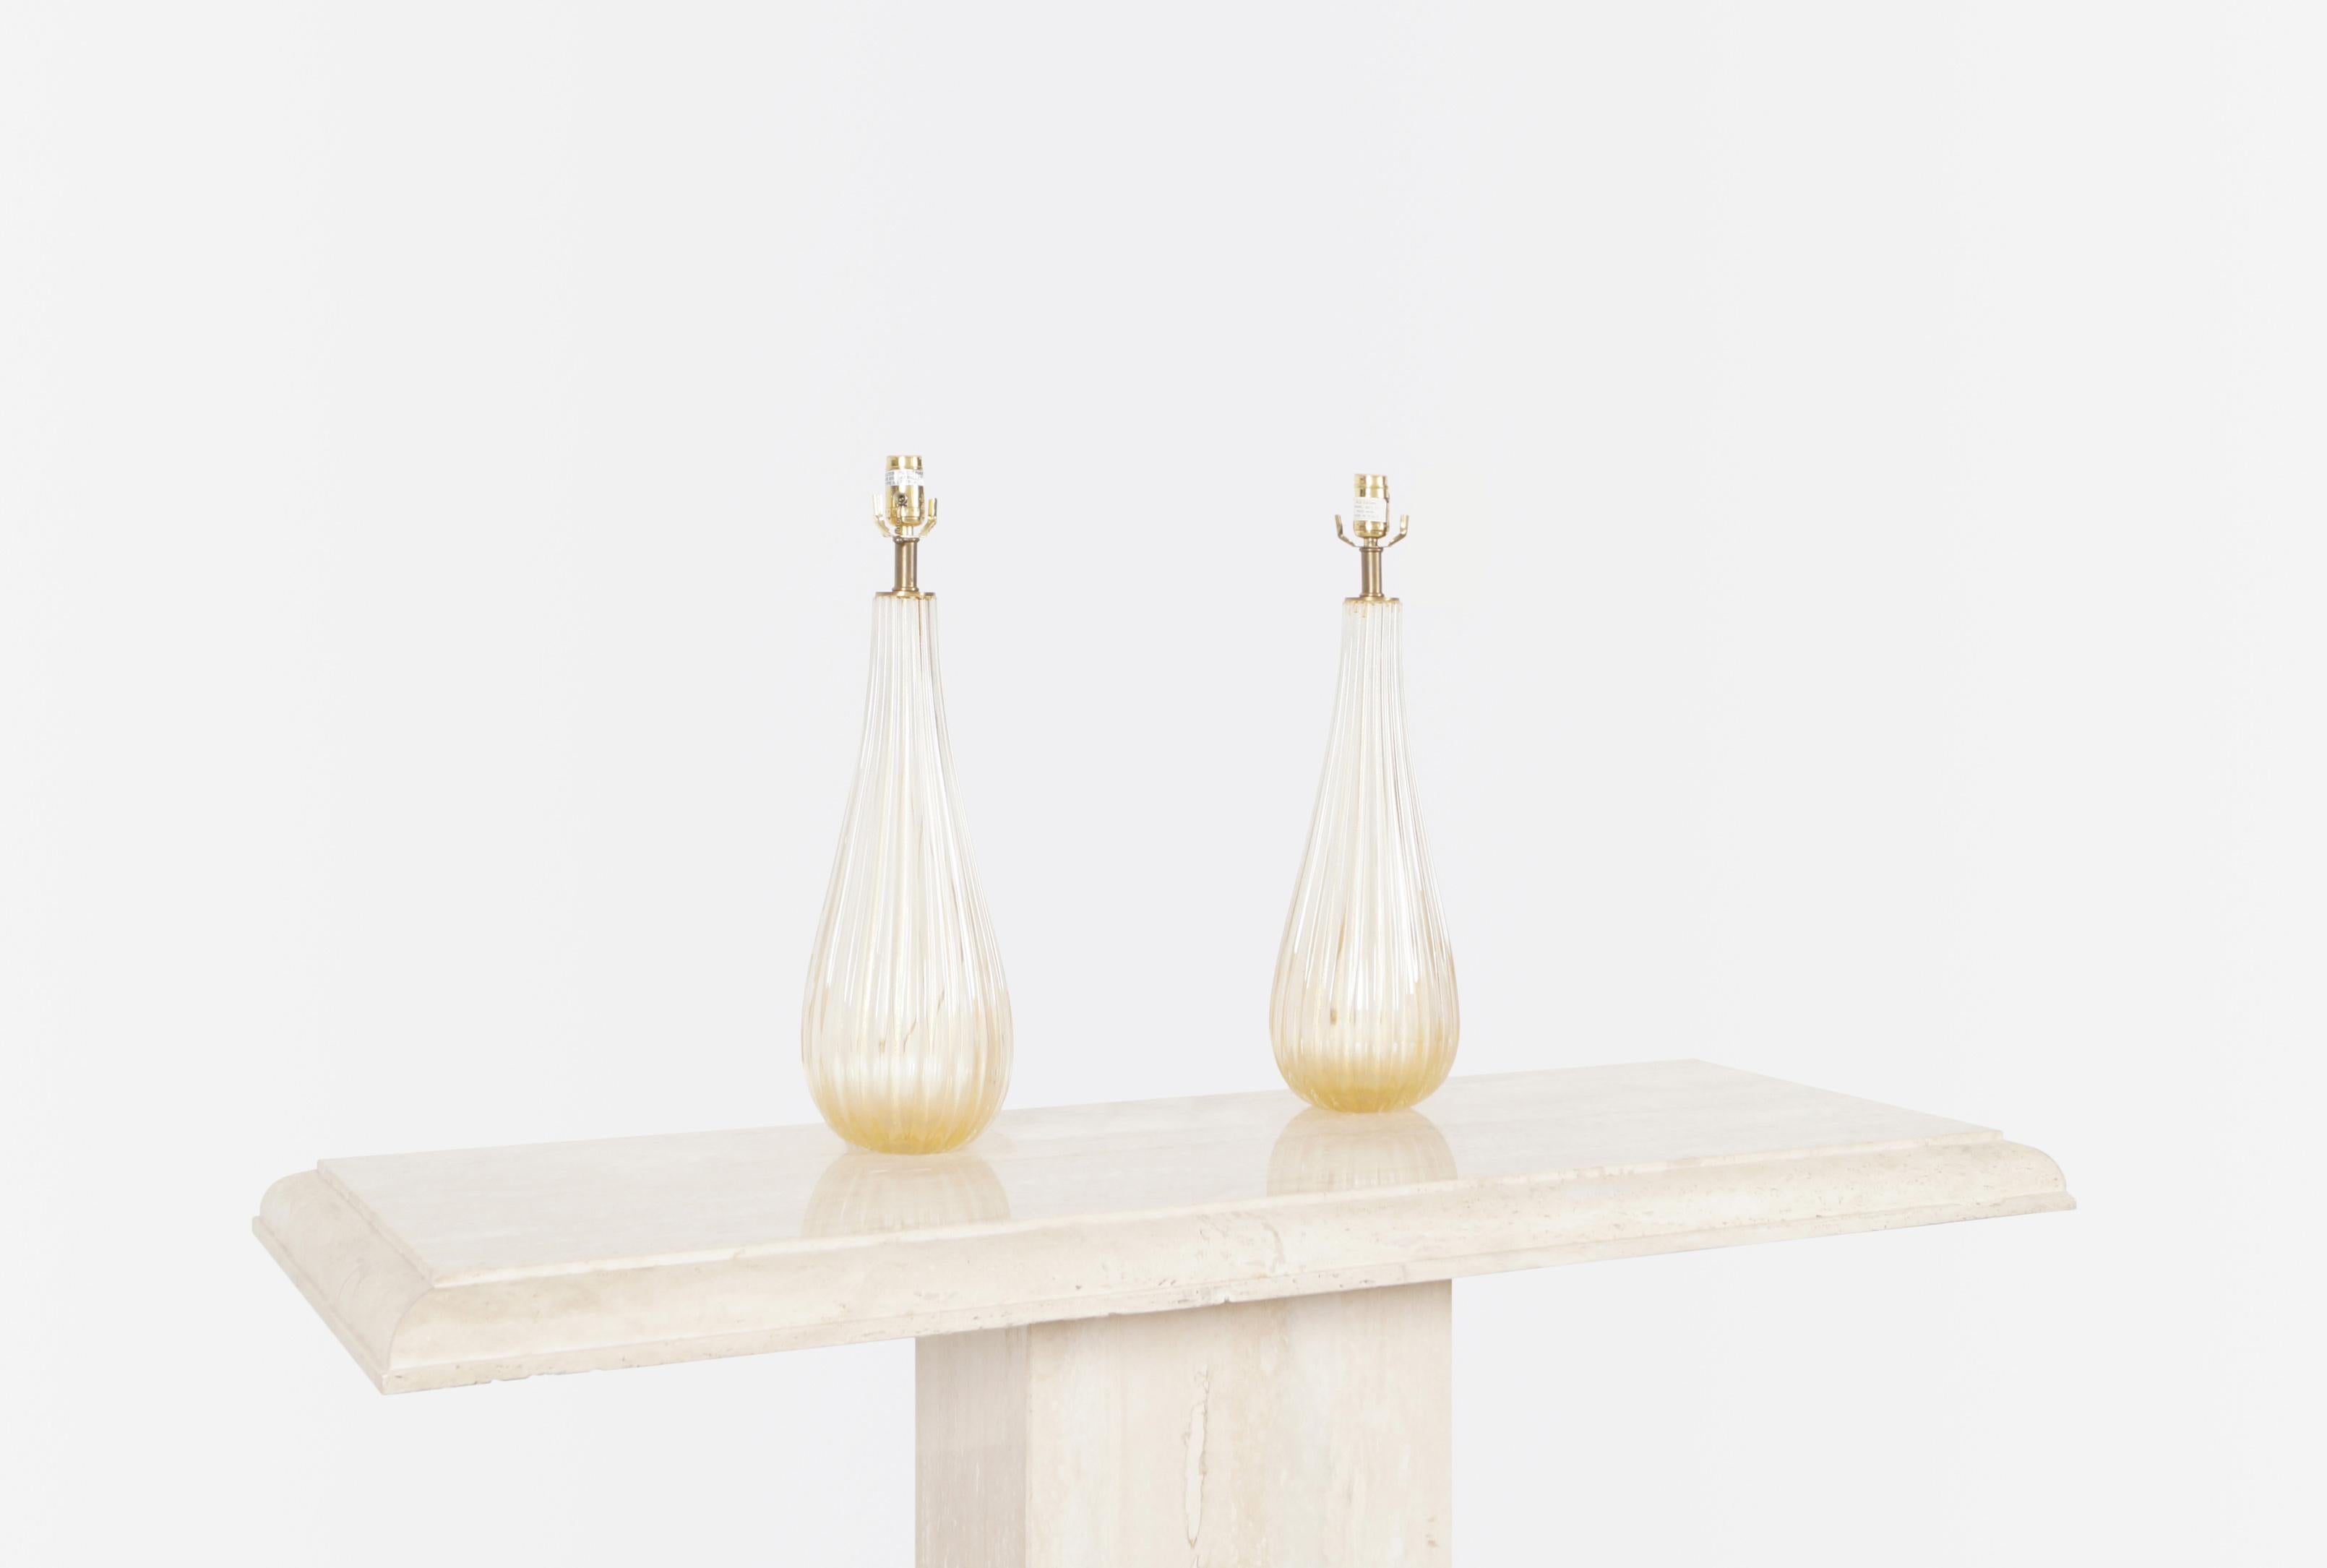 A pair of elegant vintage modernist Murano lamps manufactured in Italy, circa 1960s. These lamps have the shape of a water drop, that when illuminated, turns into a beautiful color. Reflecting through their bodies is a trace of gold flakes that give